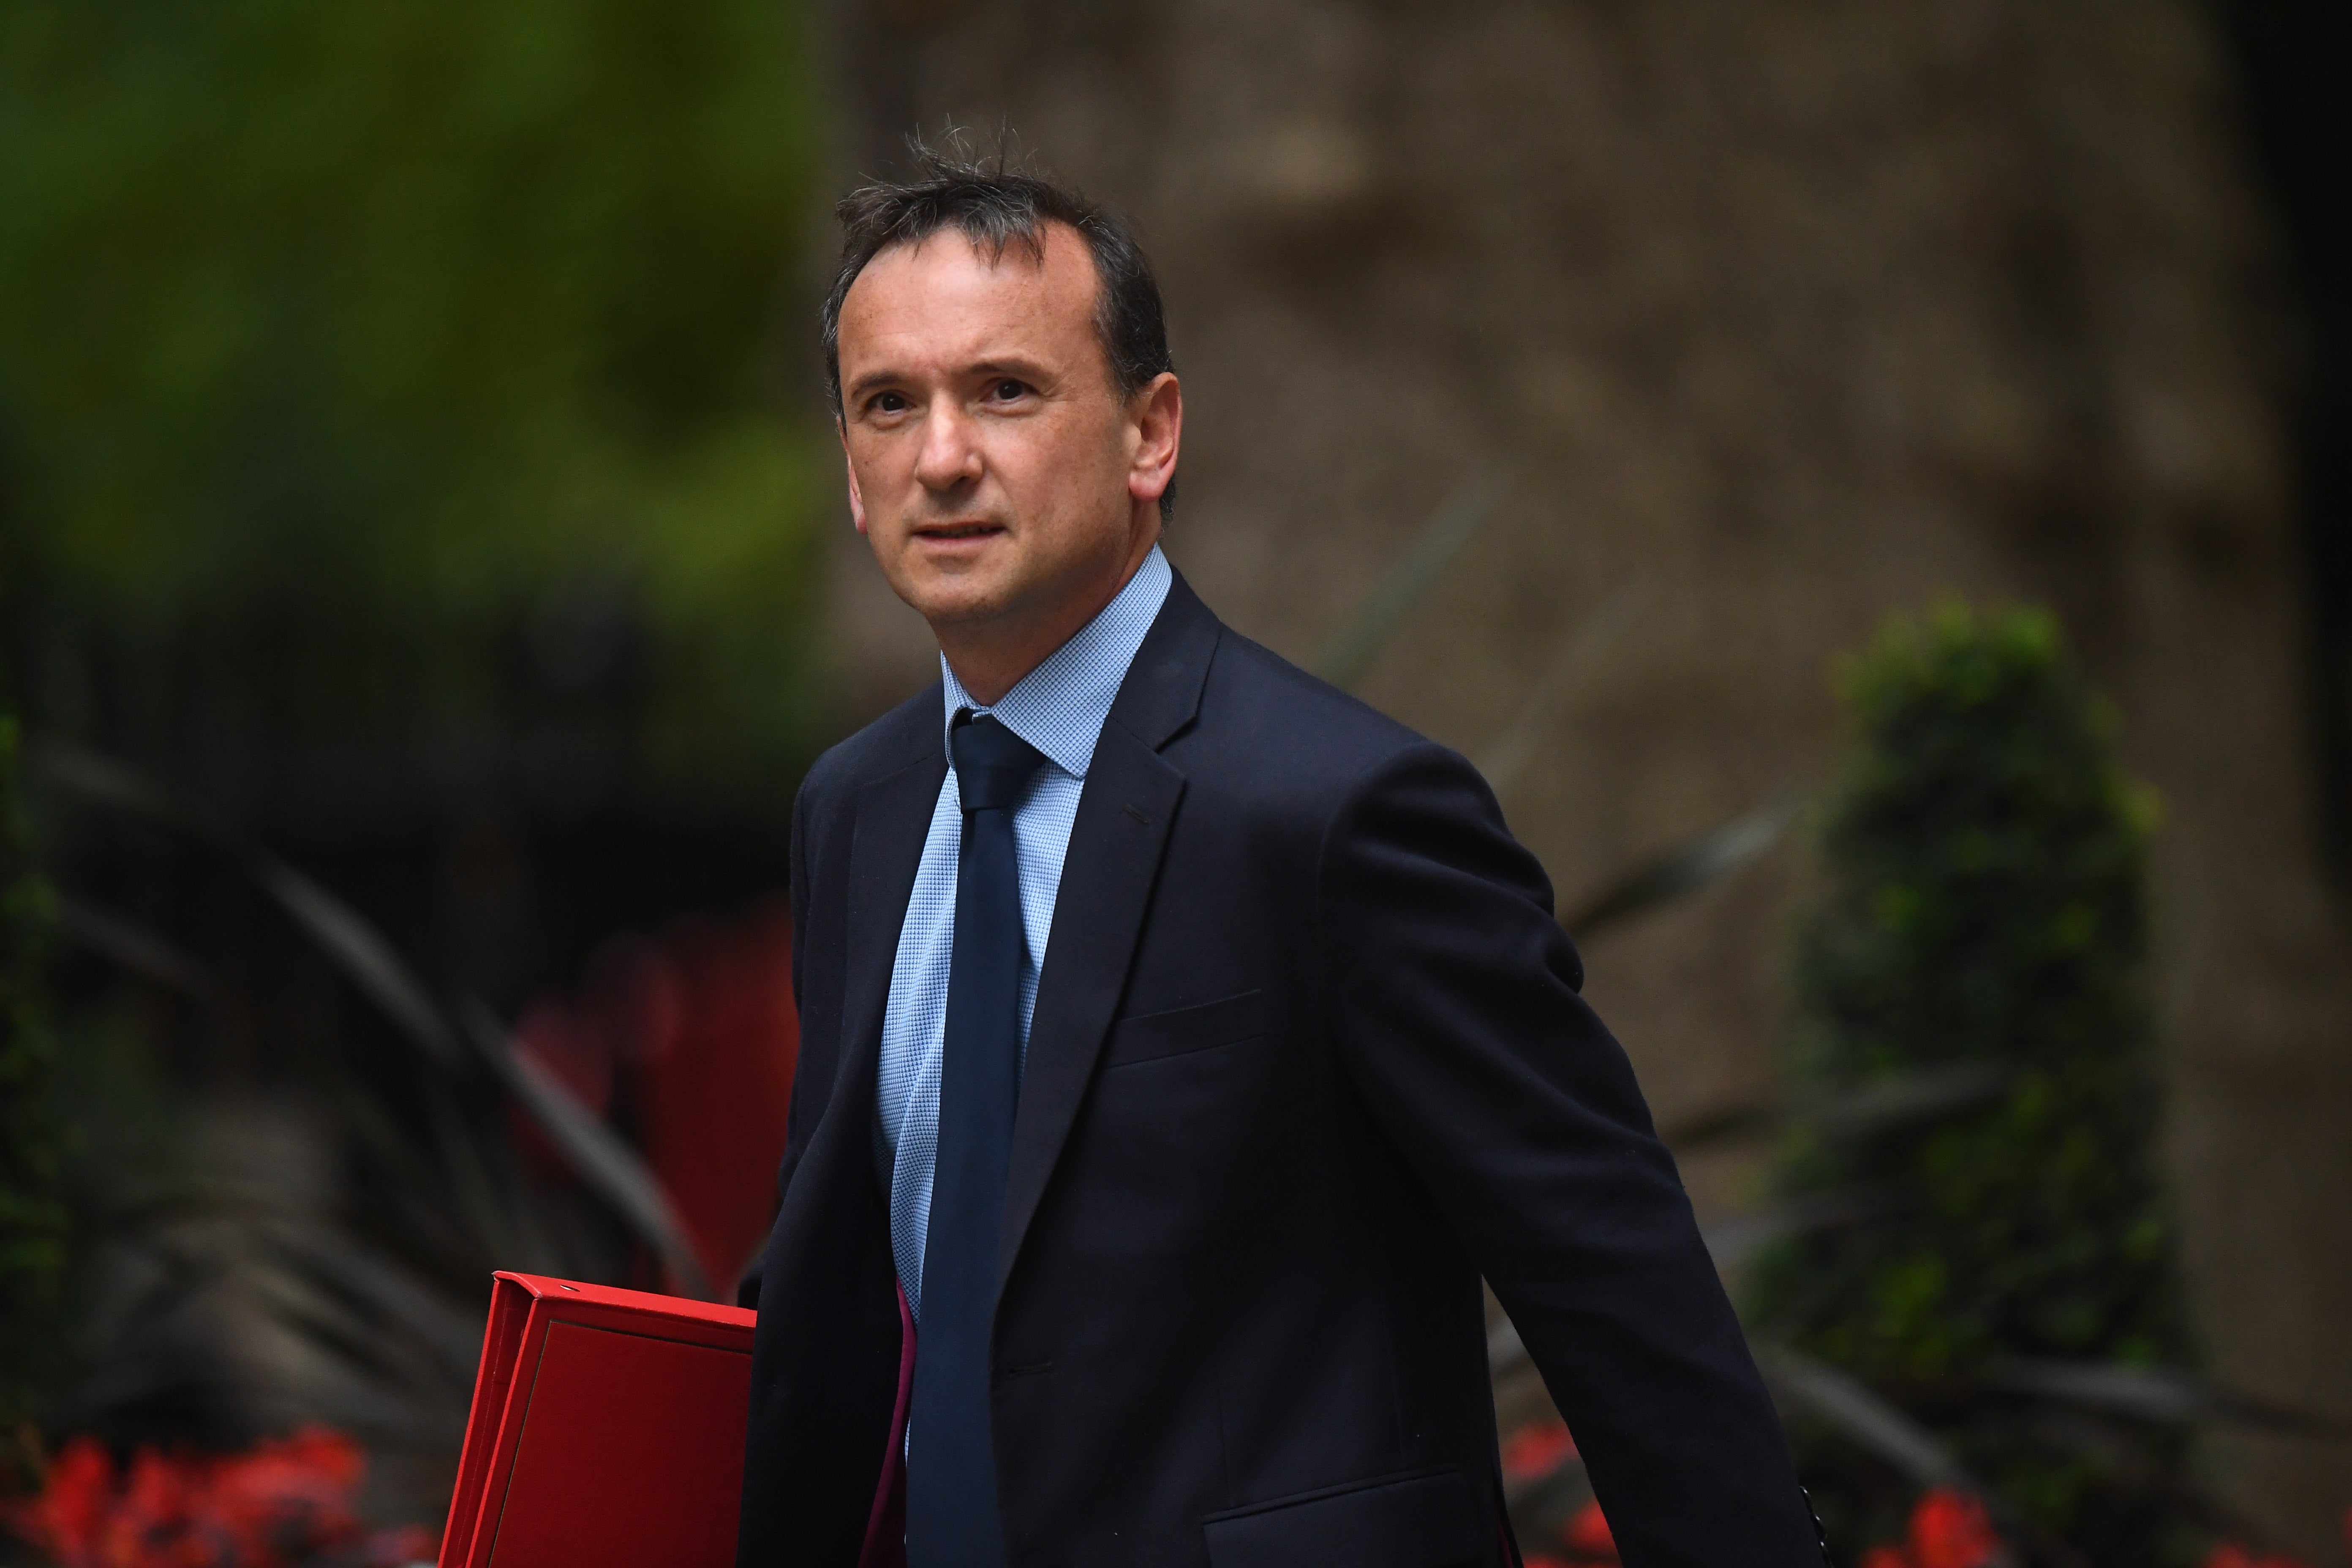 Alun Cairns has switched sides (Victoria Jones/PA)